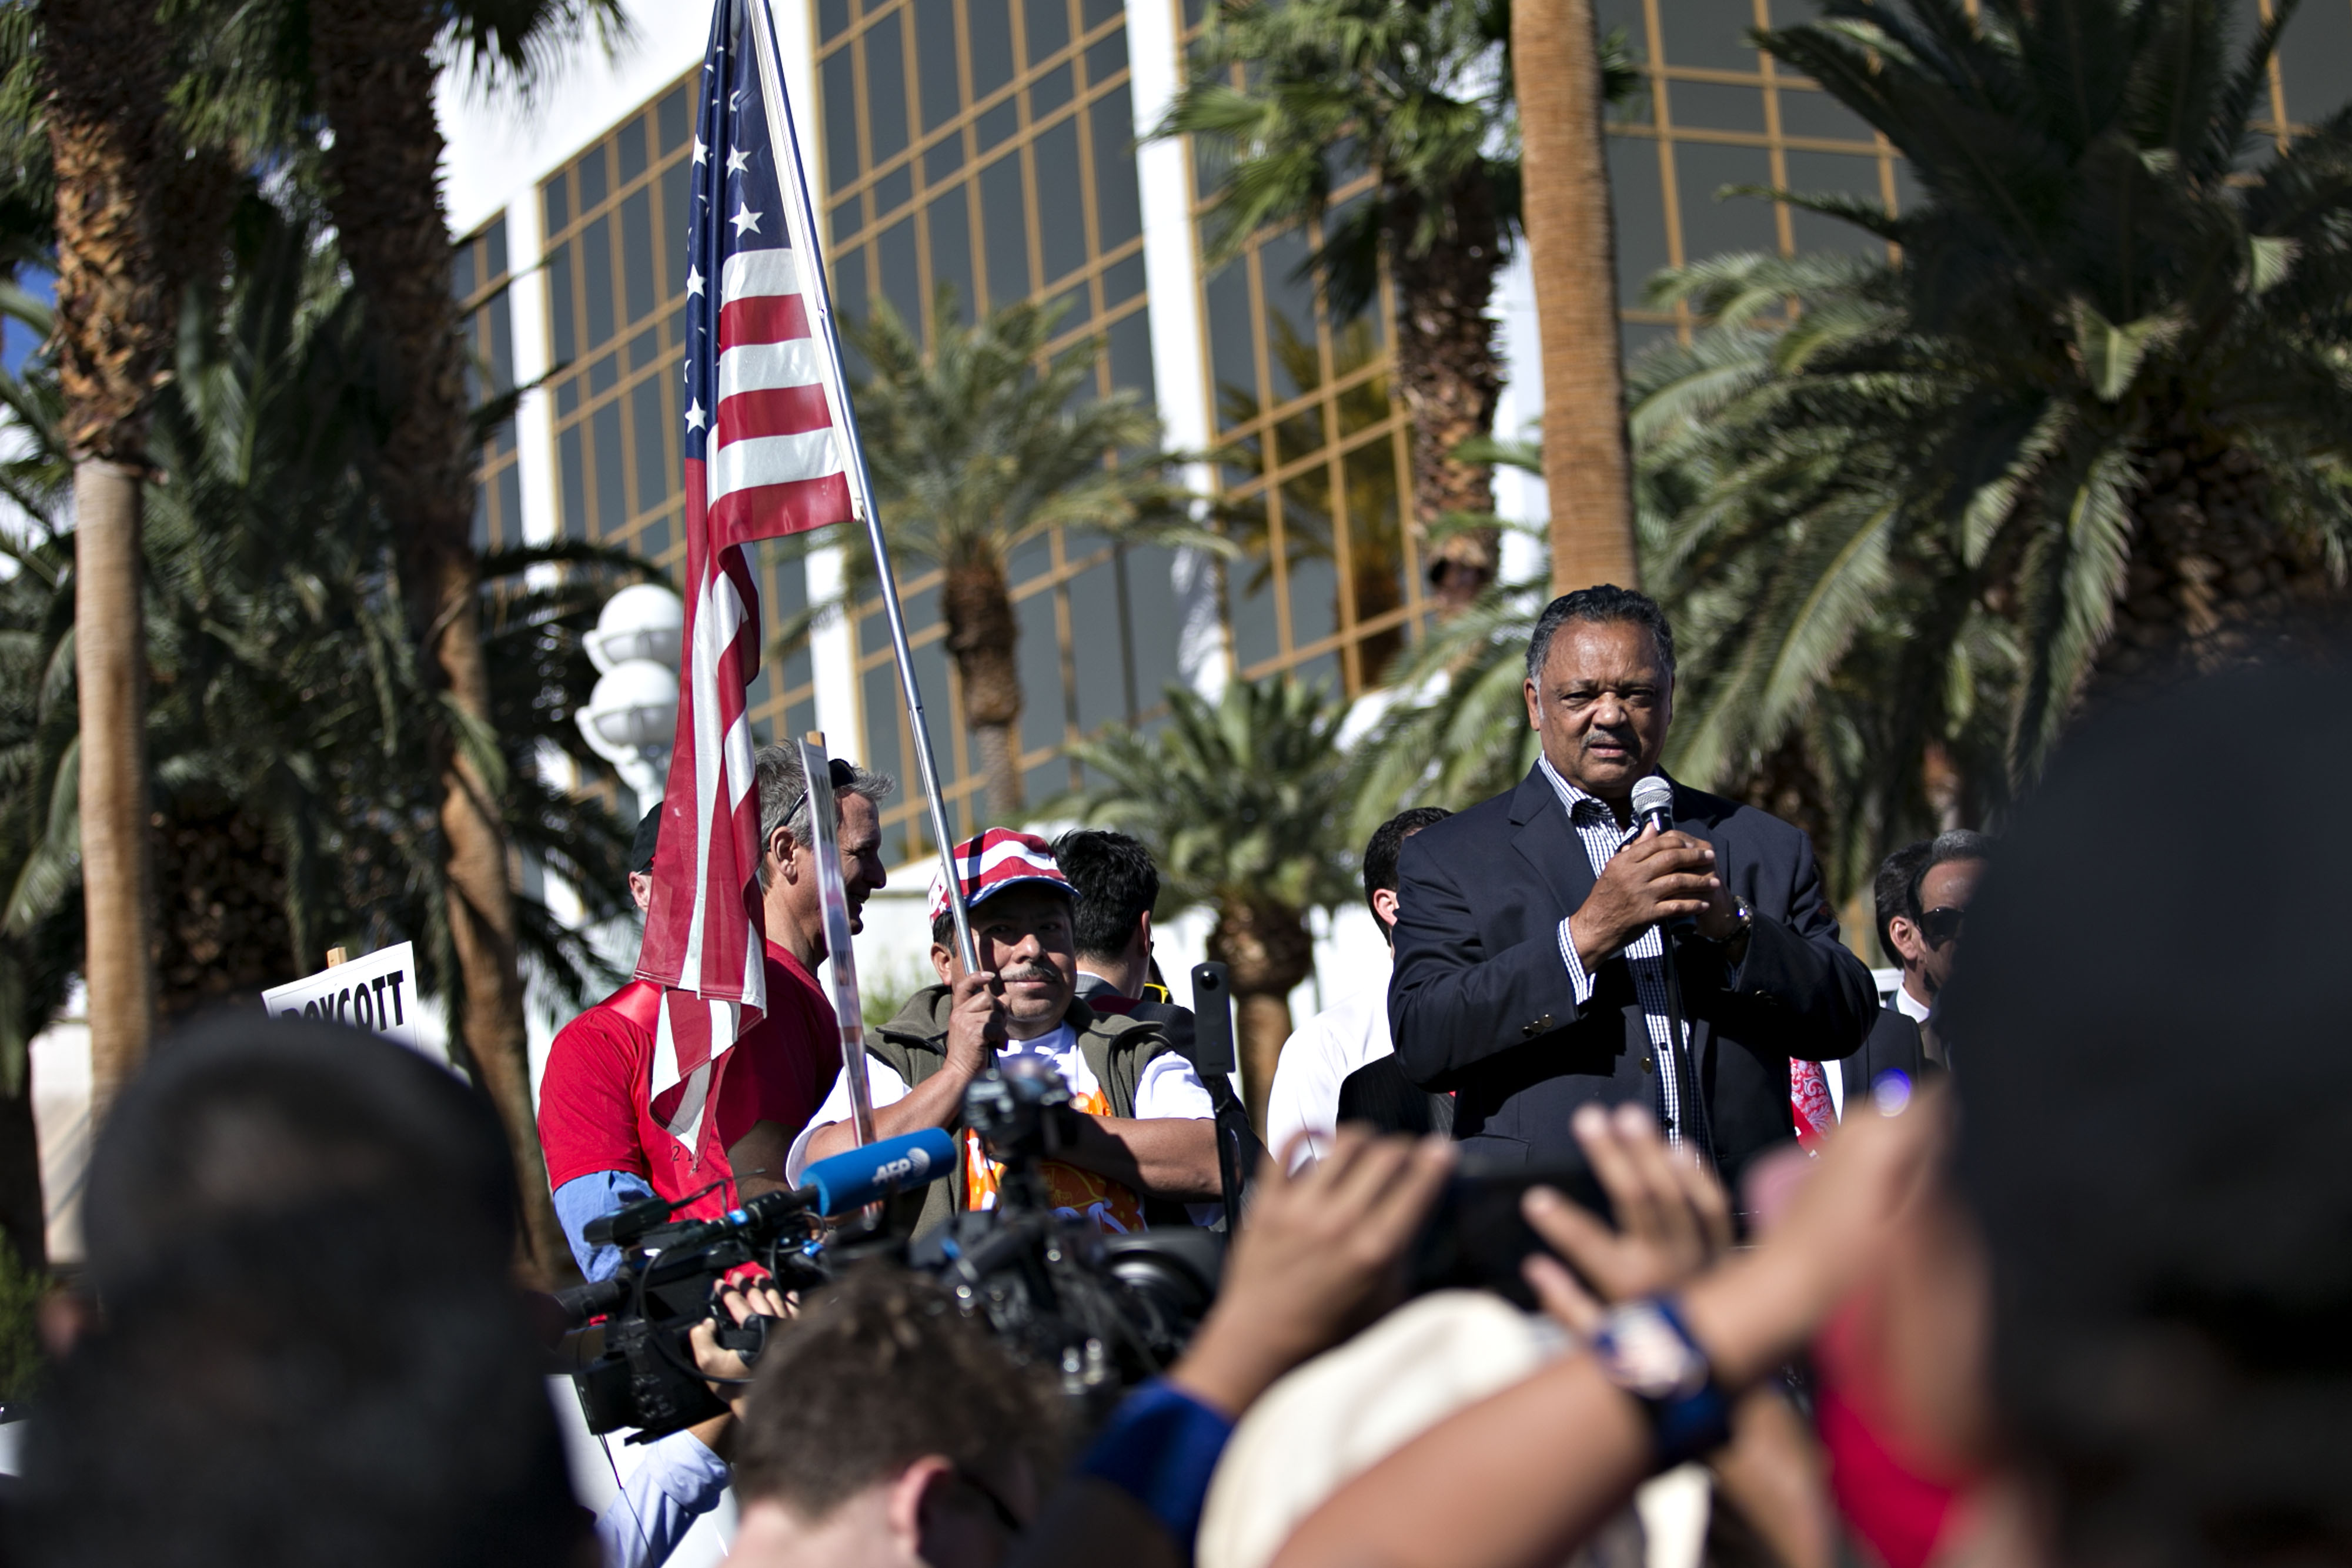 Reverend Jesse Jackson speaks during a demonstration outside the Trump International Hotel Las Vegas ahead of the third presidential debate in Las Vegas, Nevada, U.S., on Wednesday, Oct. 19, 2016. The debate, moderated by Chris Wallace of Fox News, will be the final meeting of Donald Trump and Hillary Clinton ahead of the November 8 presidential election. Photographer: Daniel Acker/Bloomberg (Daniel Acker&mdash;Bloomberg)